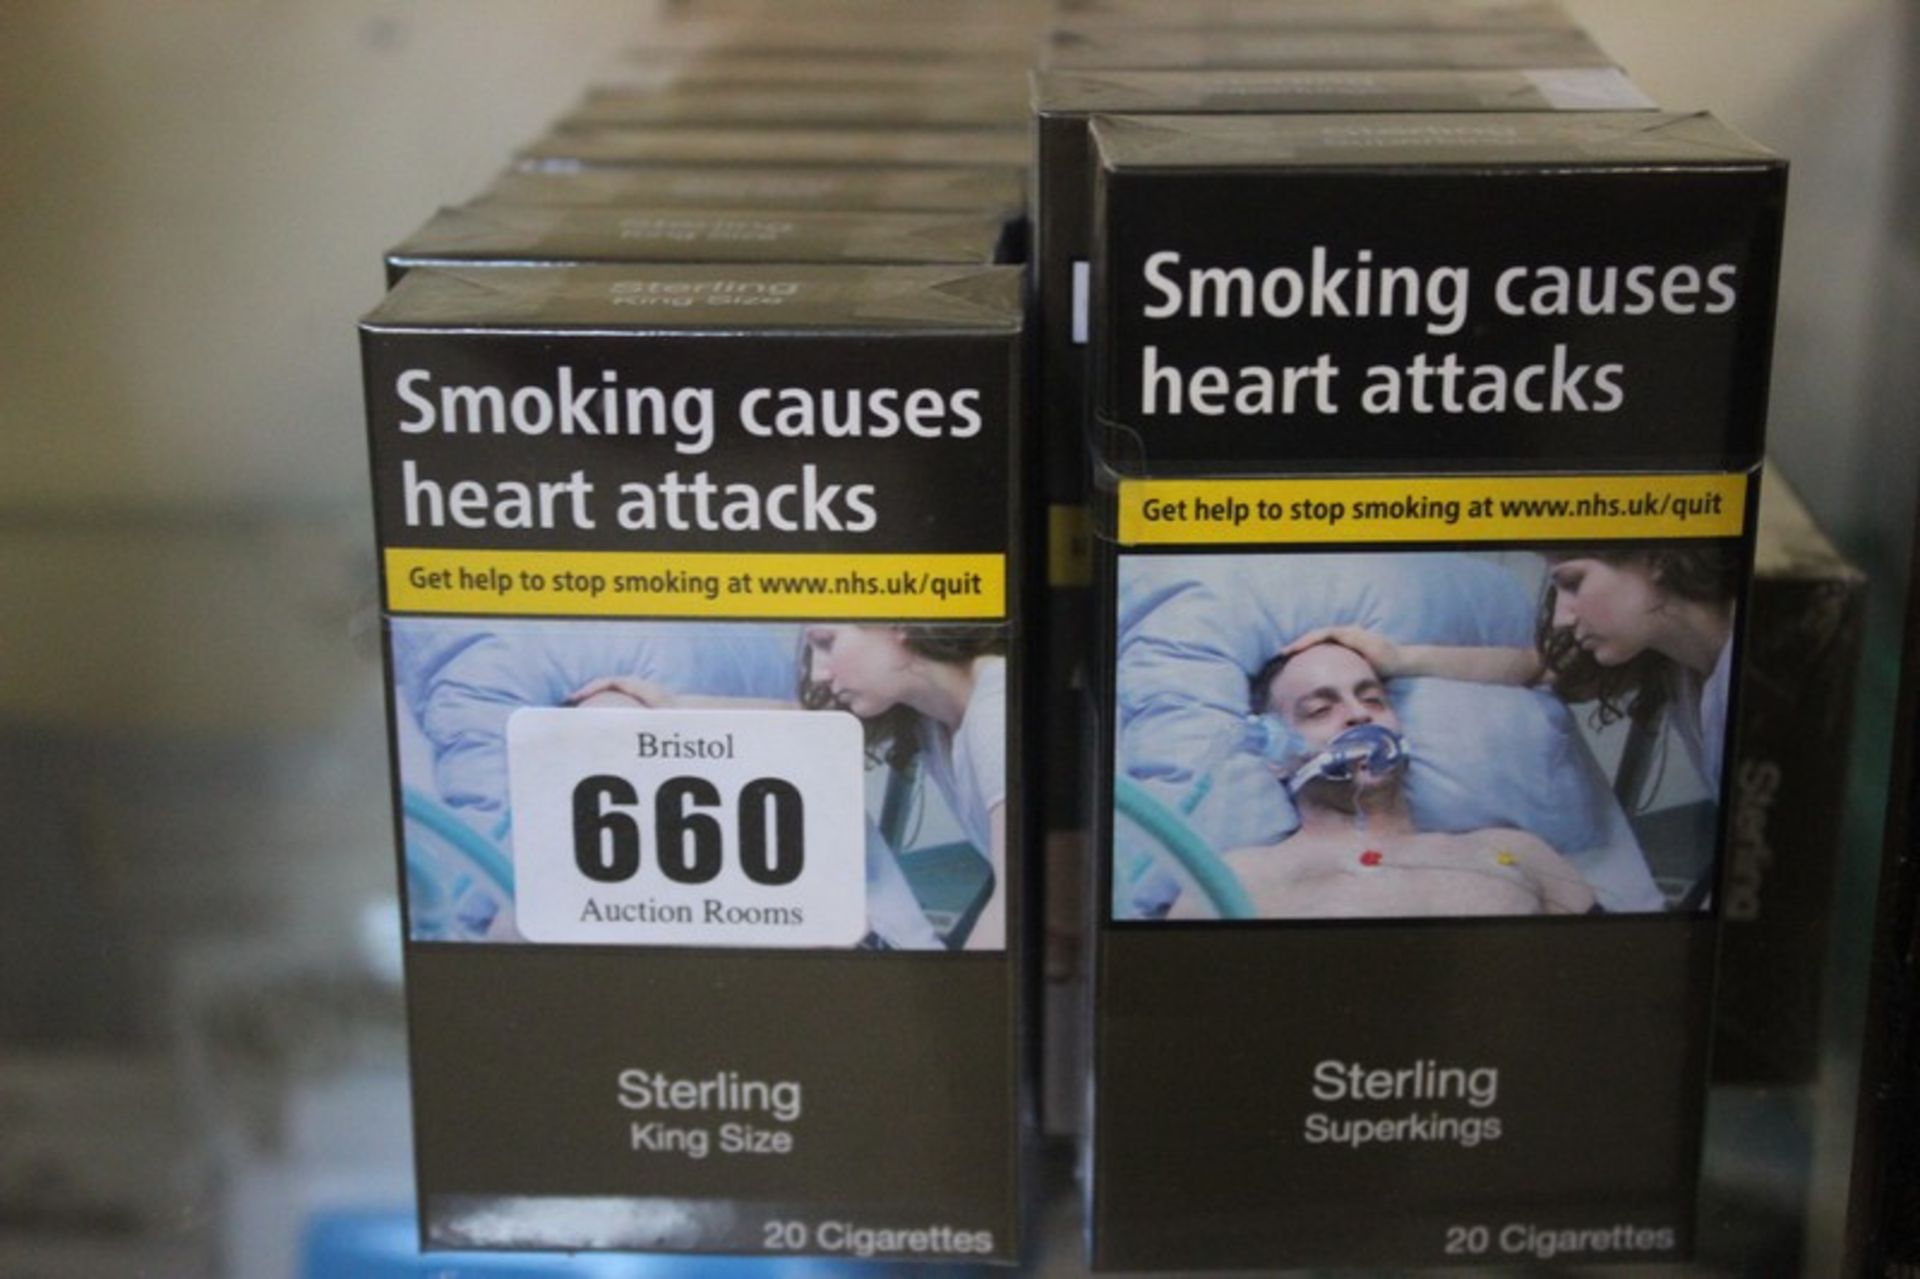 Cigarettes to include six Sterling Superkings, six Sterling Dual and ten Sterling Kingsize (20